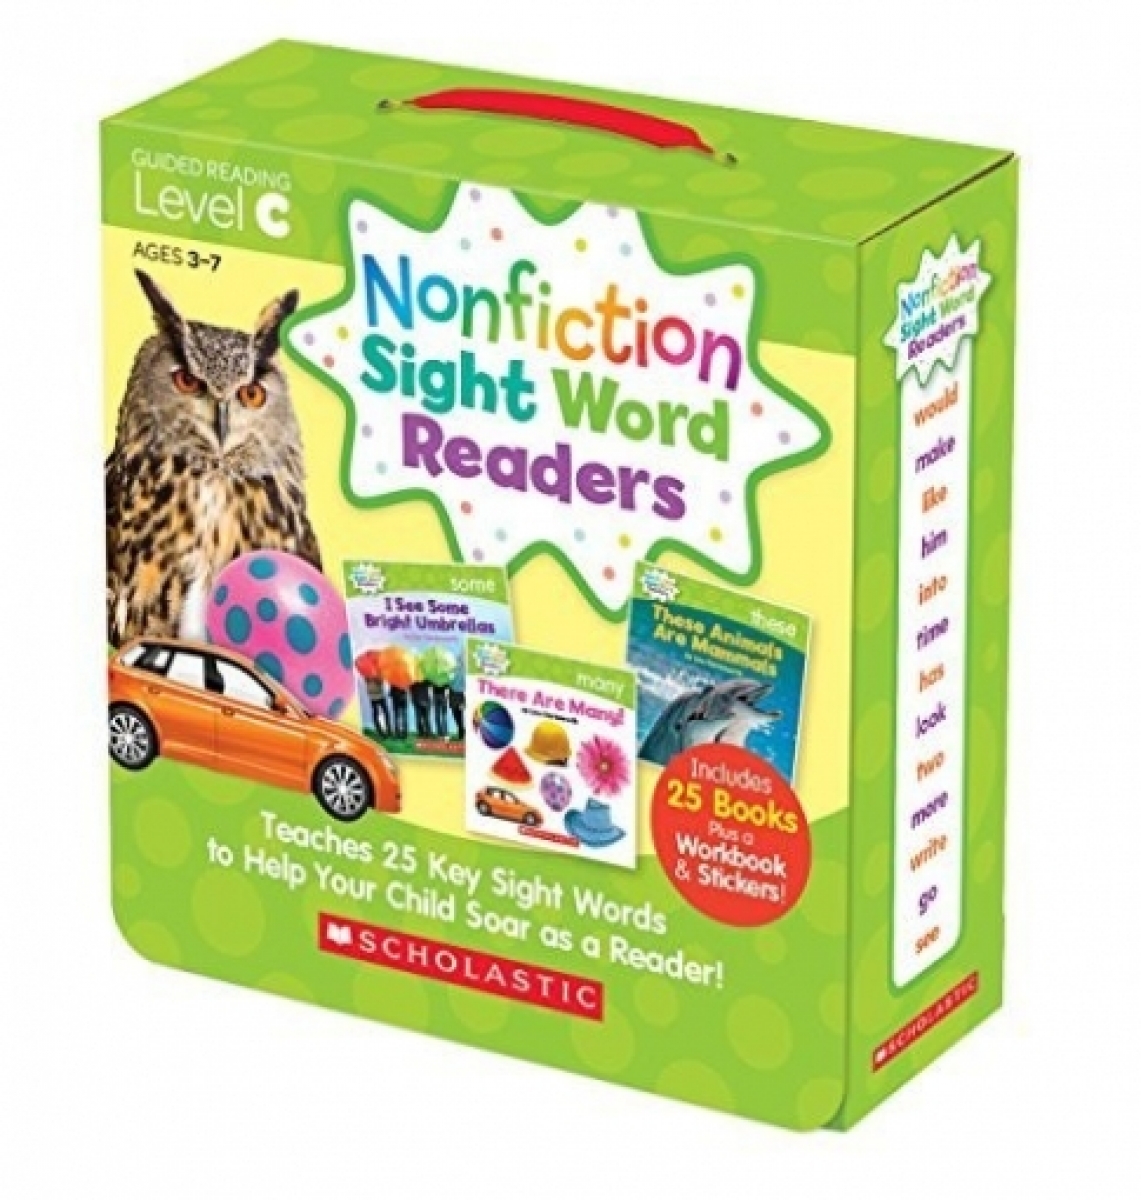 Charlesworth Liza Nonfiction Sight Word Readers. Parent Pack. Level C (25 books) 